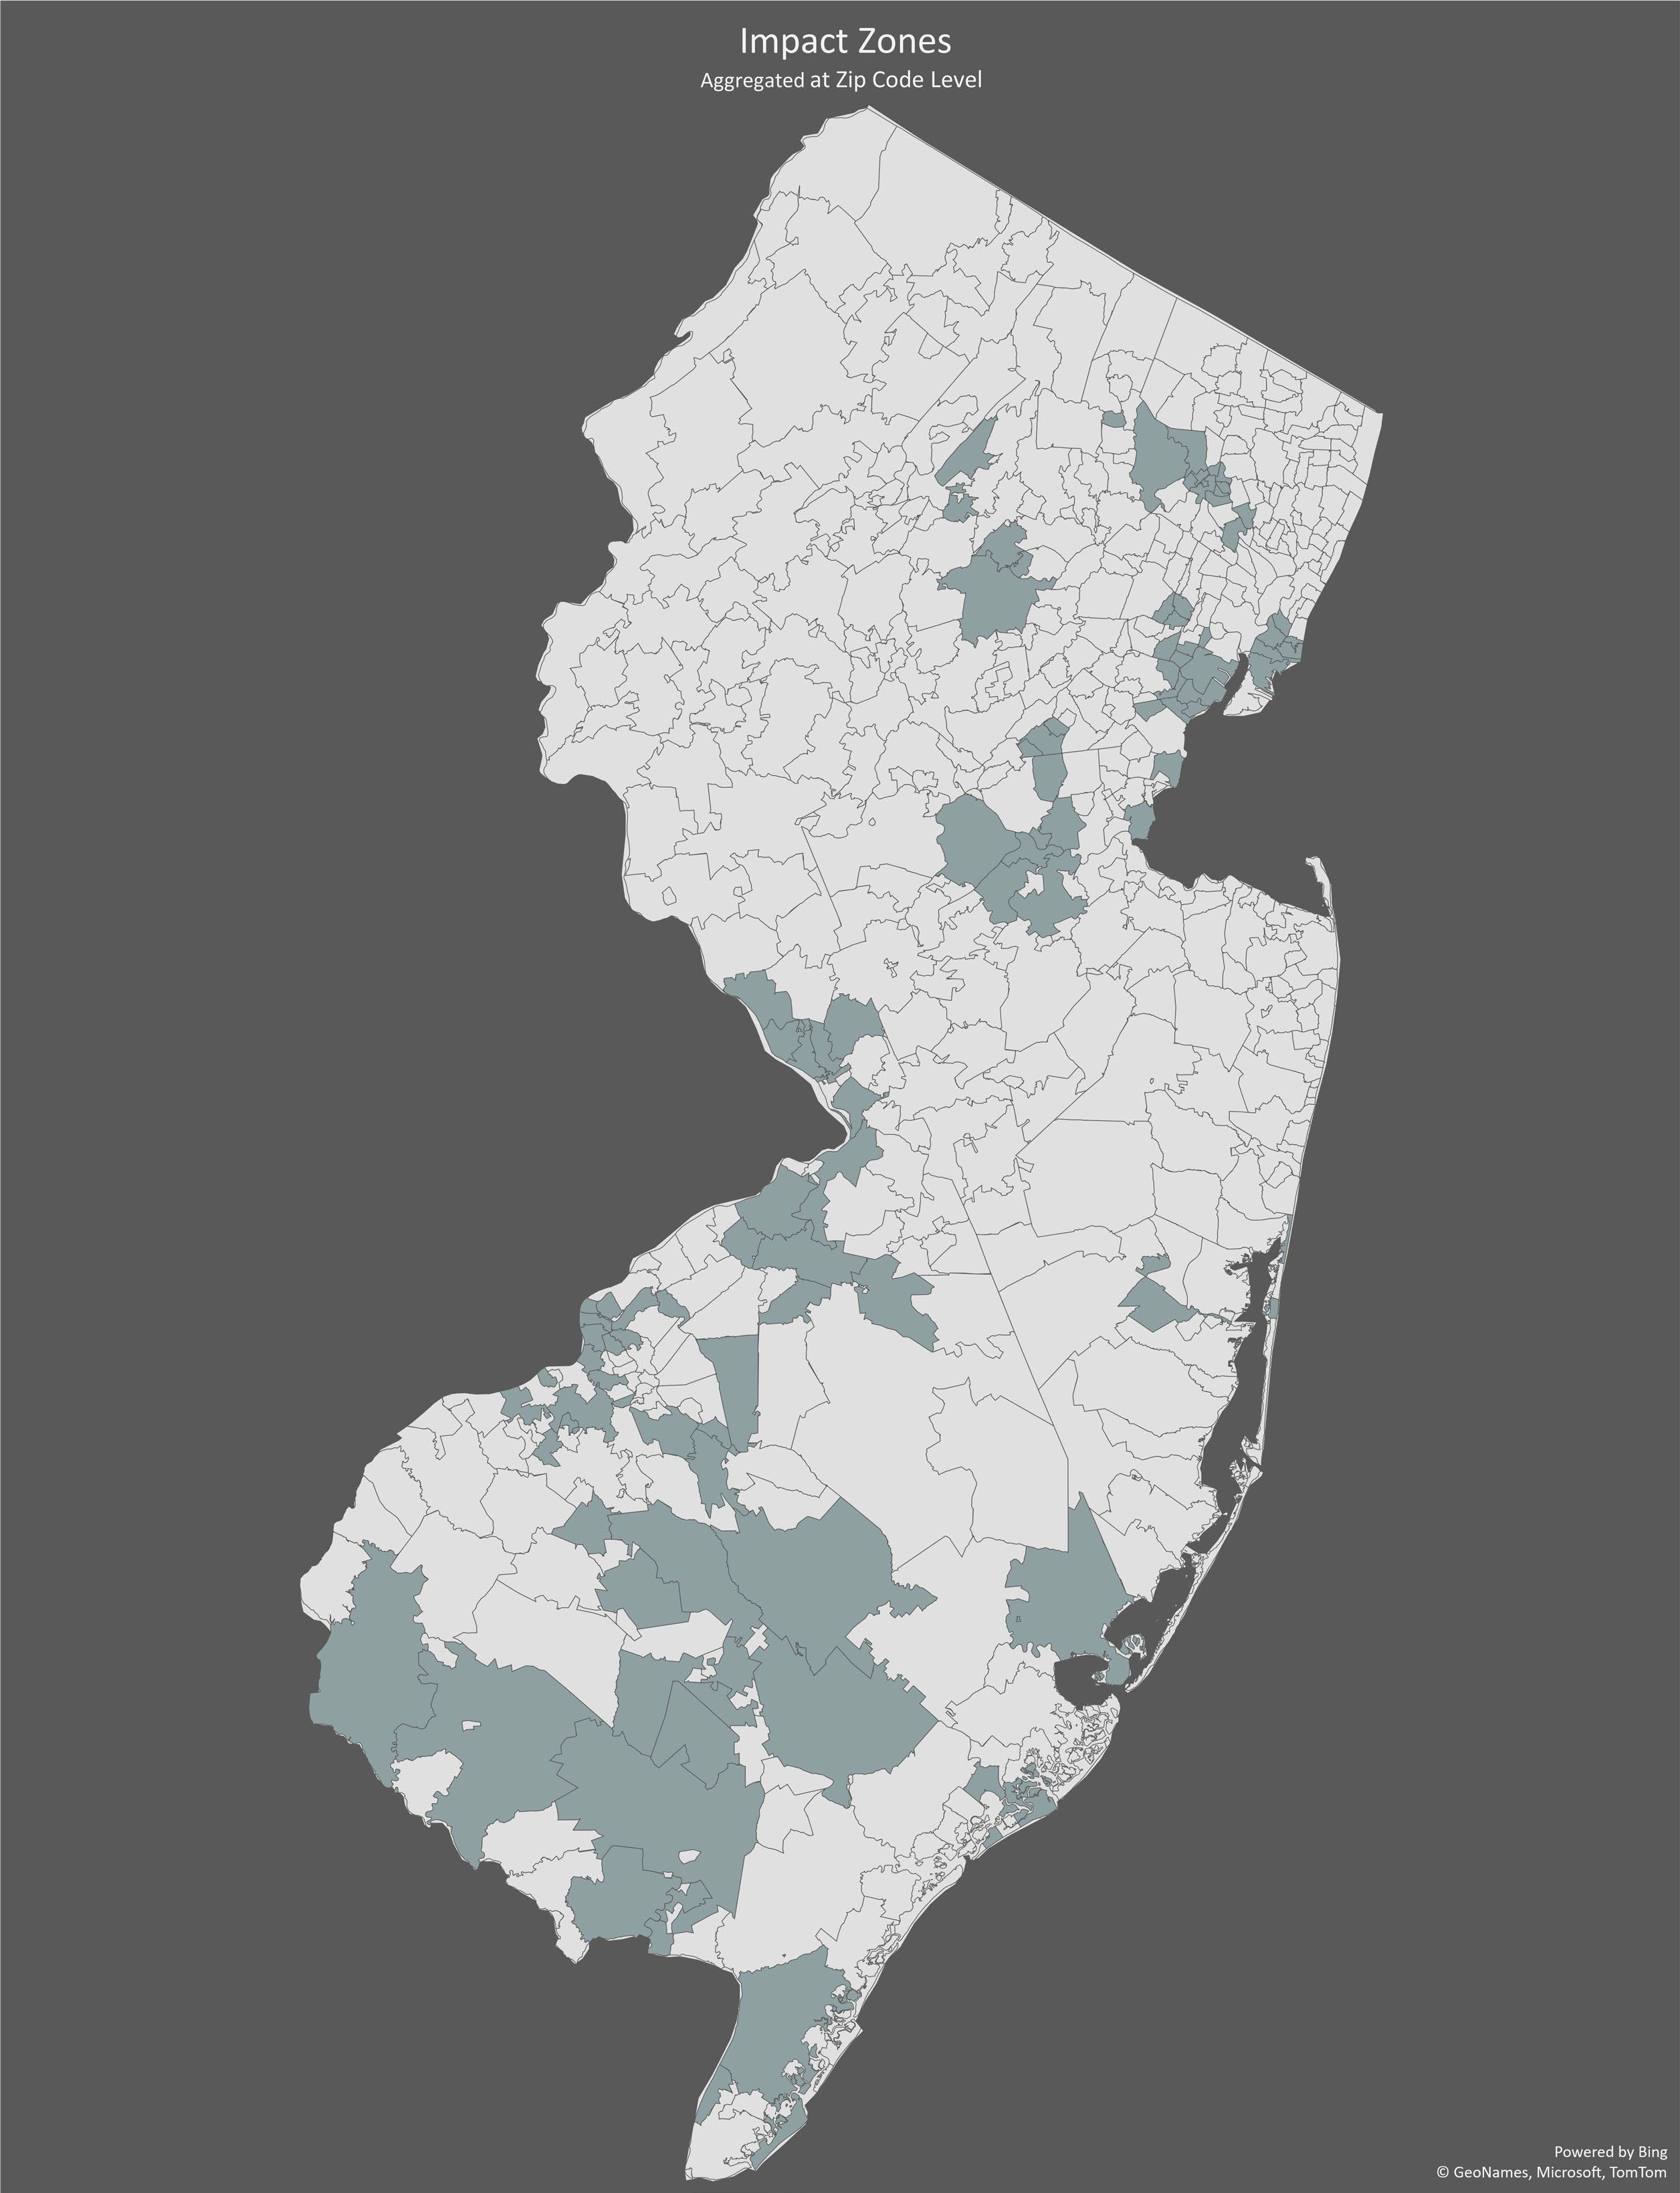 Map of NJ with Zip Code lcoations highlighted that area Impact Zones (See table of Impact Zones)